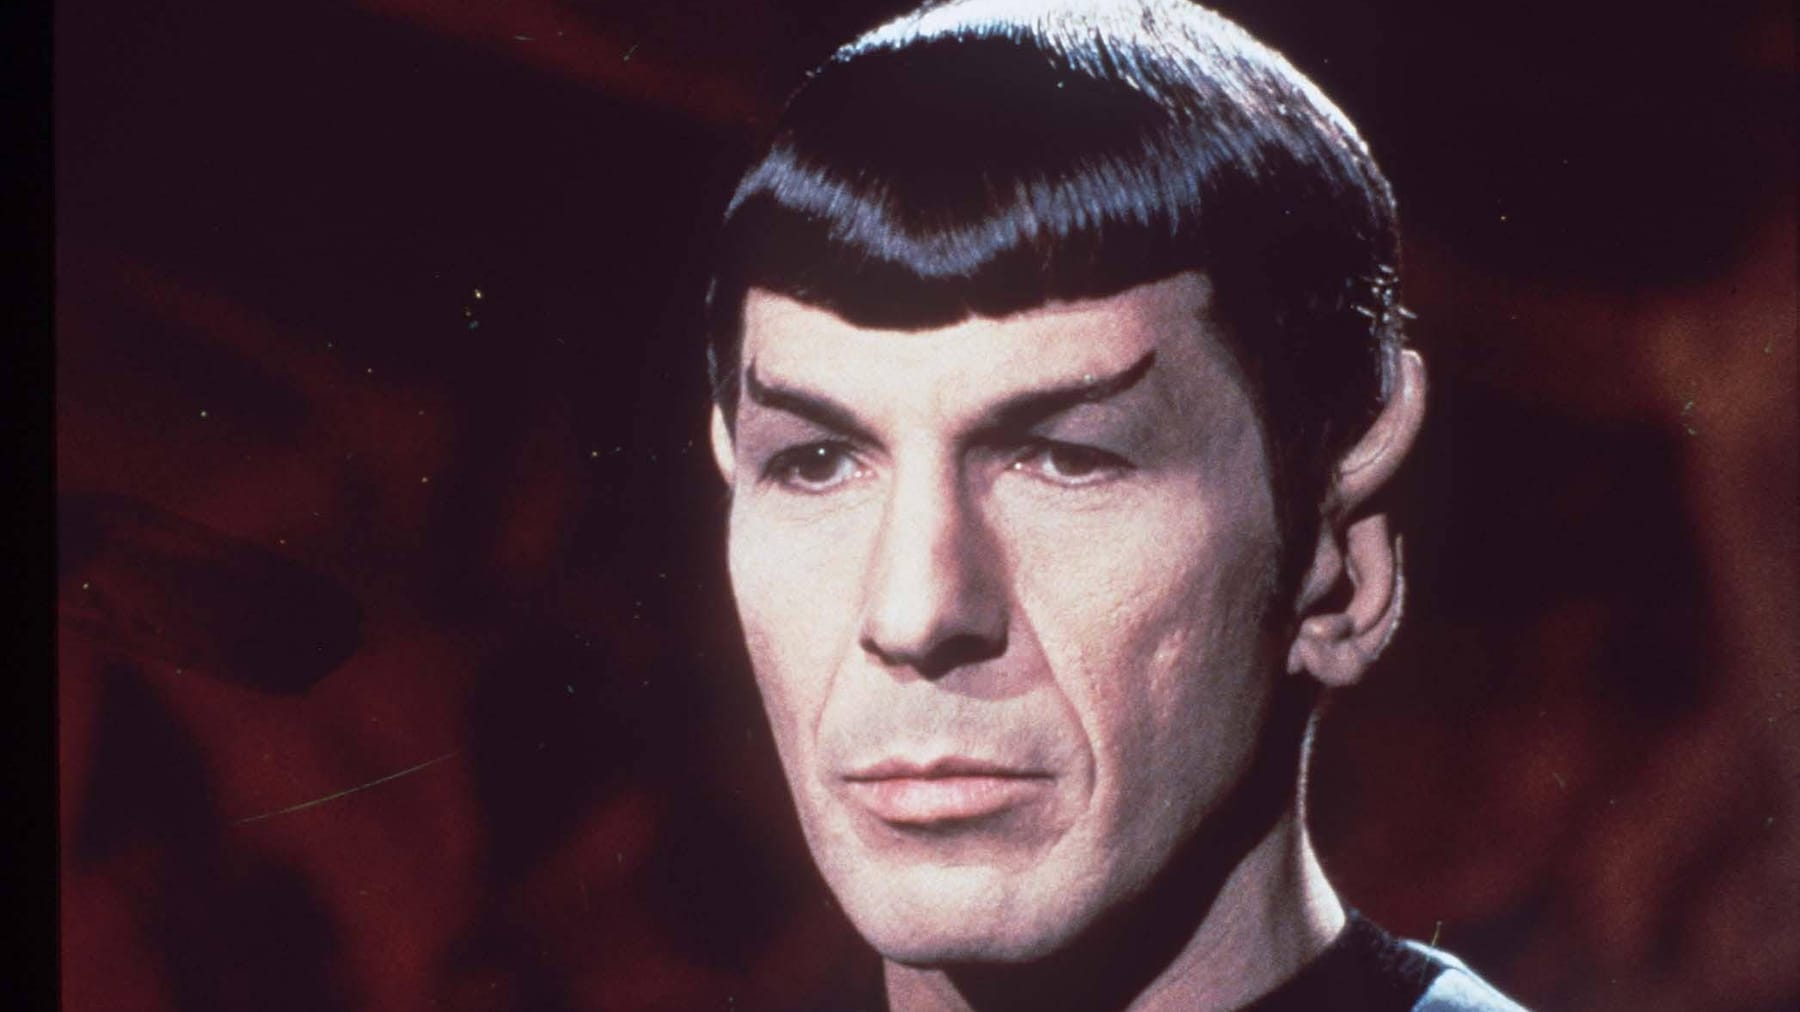 The planet where Mr. Spock lived was an “astronomical illusion.”